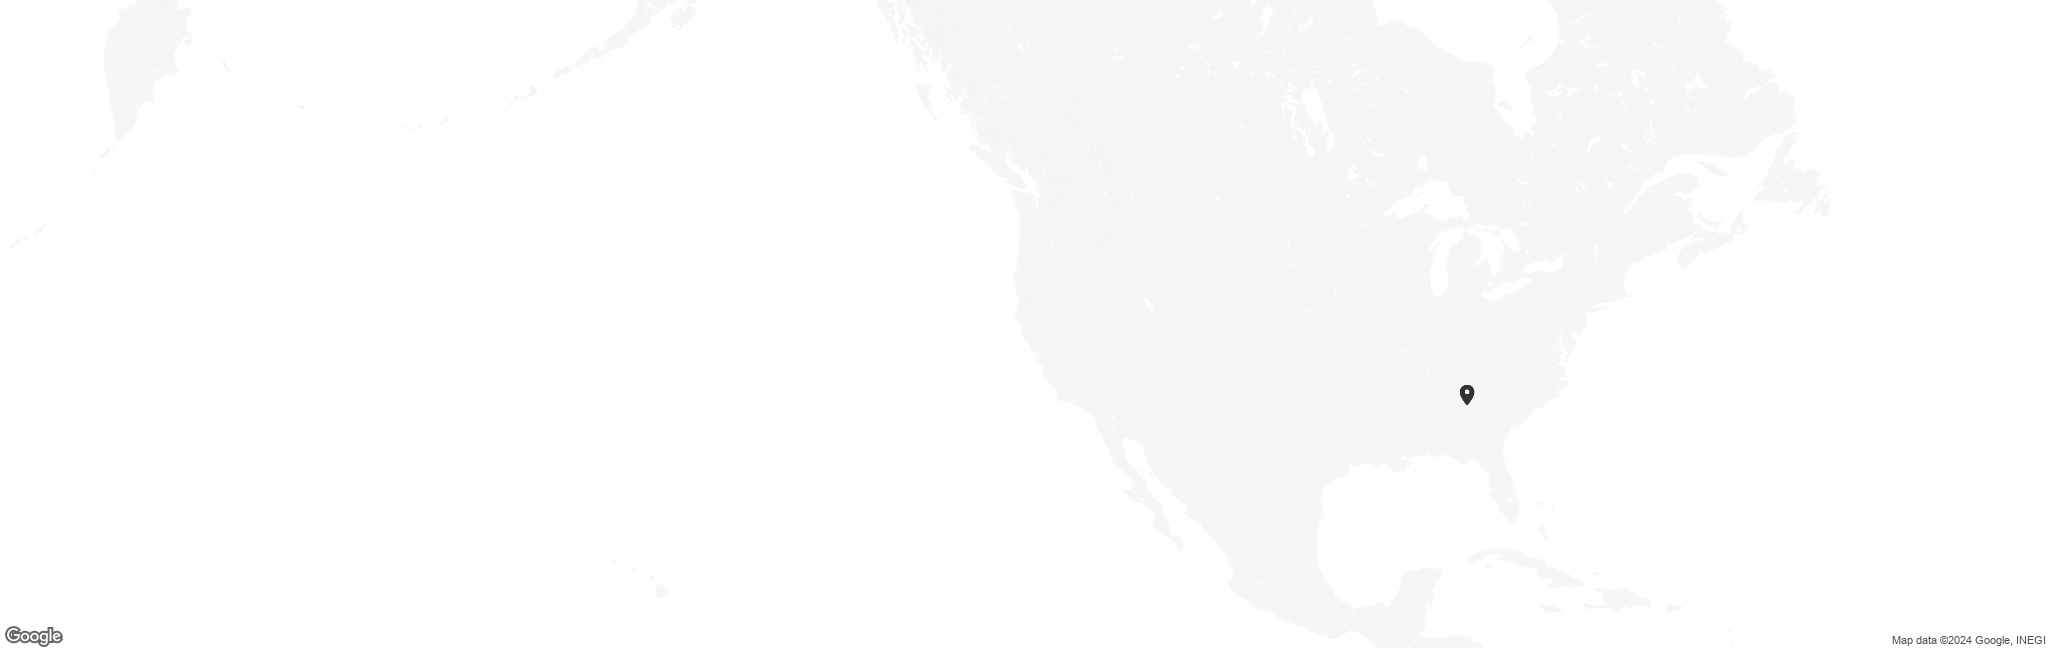 Map of US with pin of Hope of America Inc location